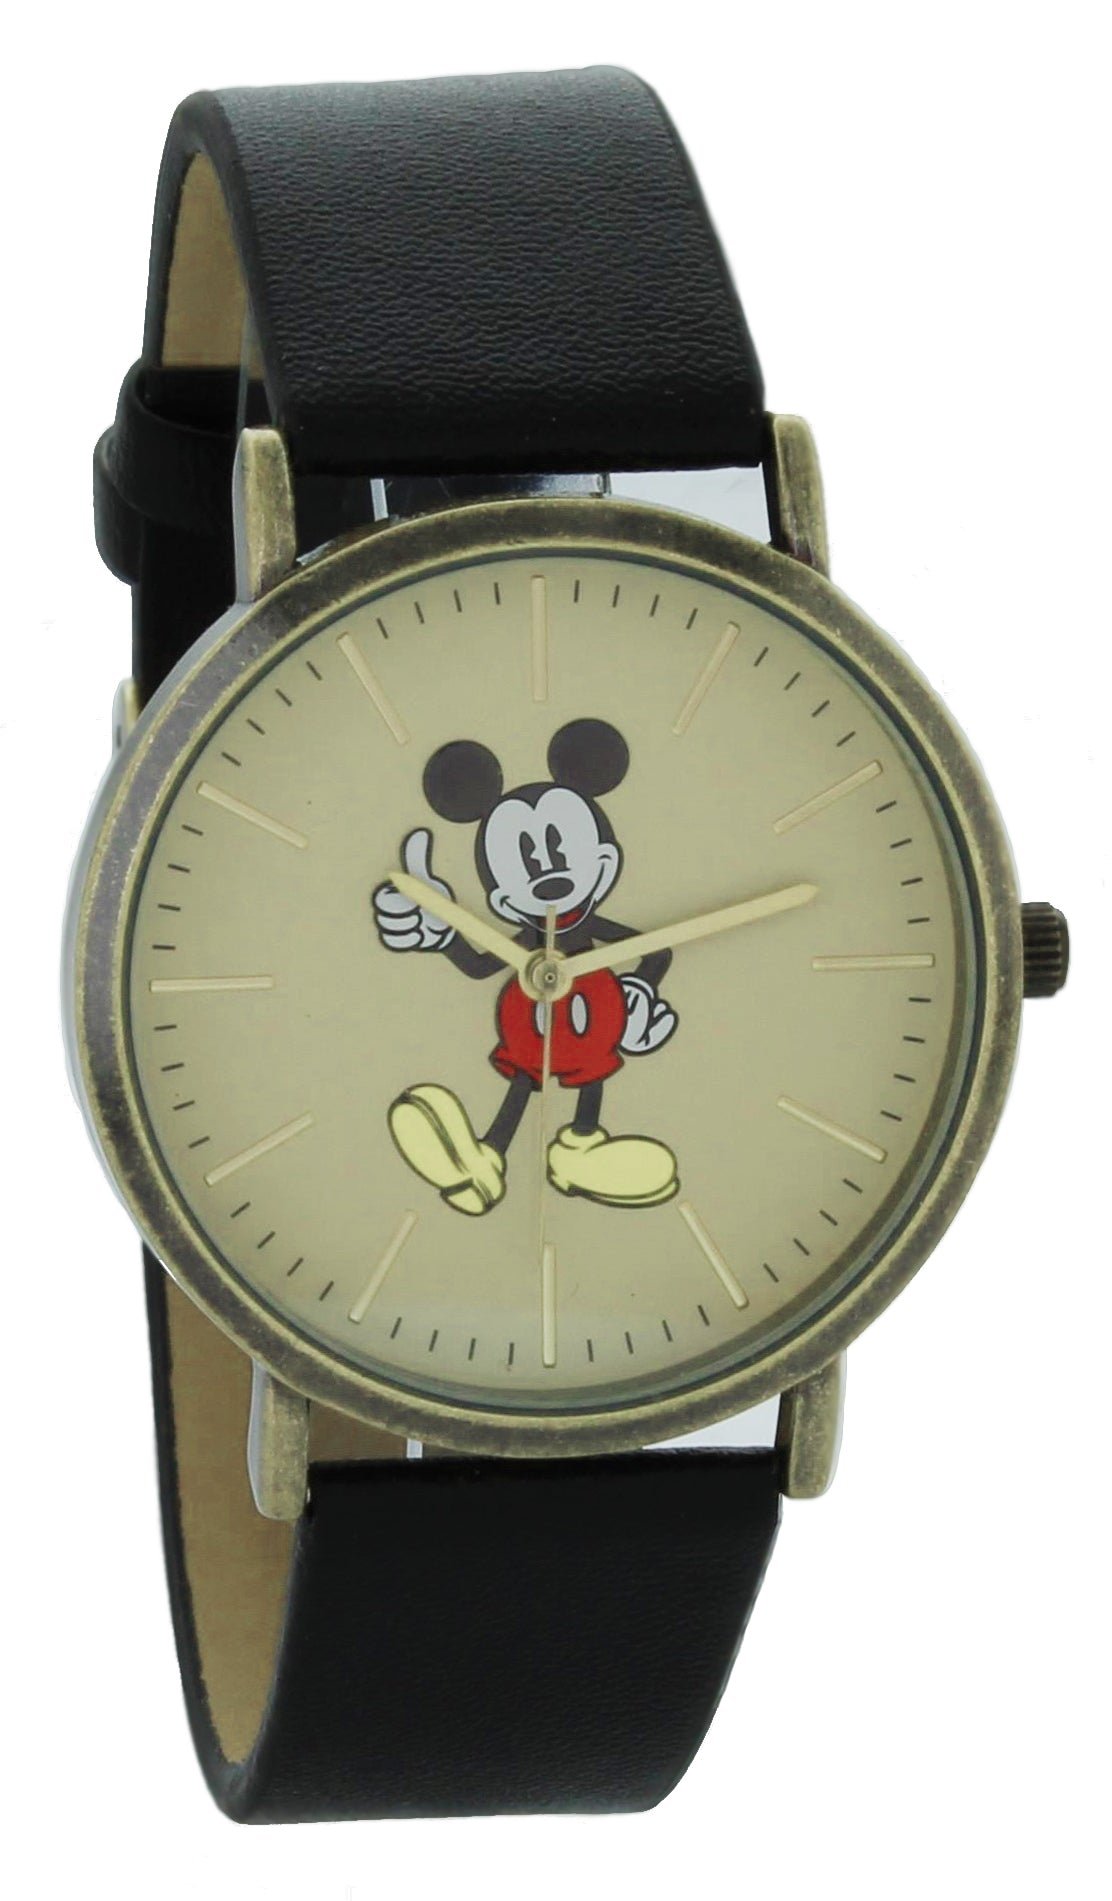 Model: Disney Mickey Mouse Watch in Mickey Mouse Gift Box with Tags